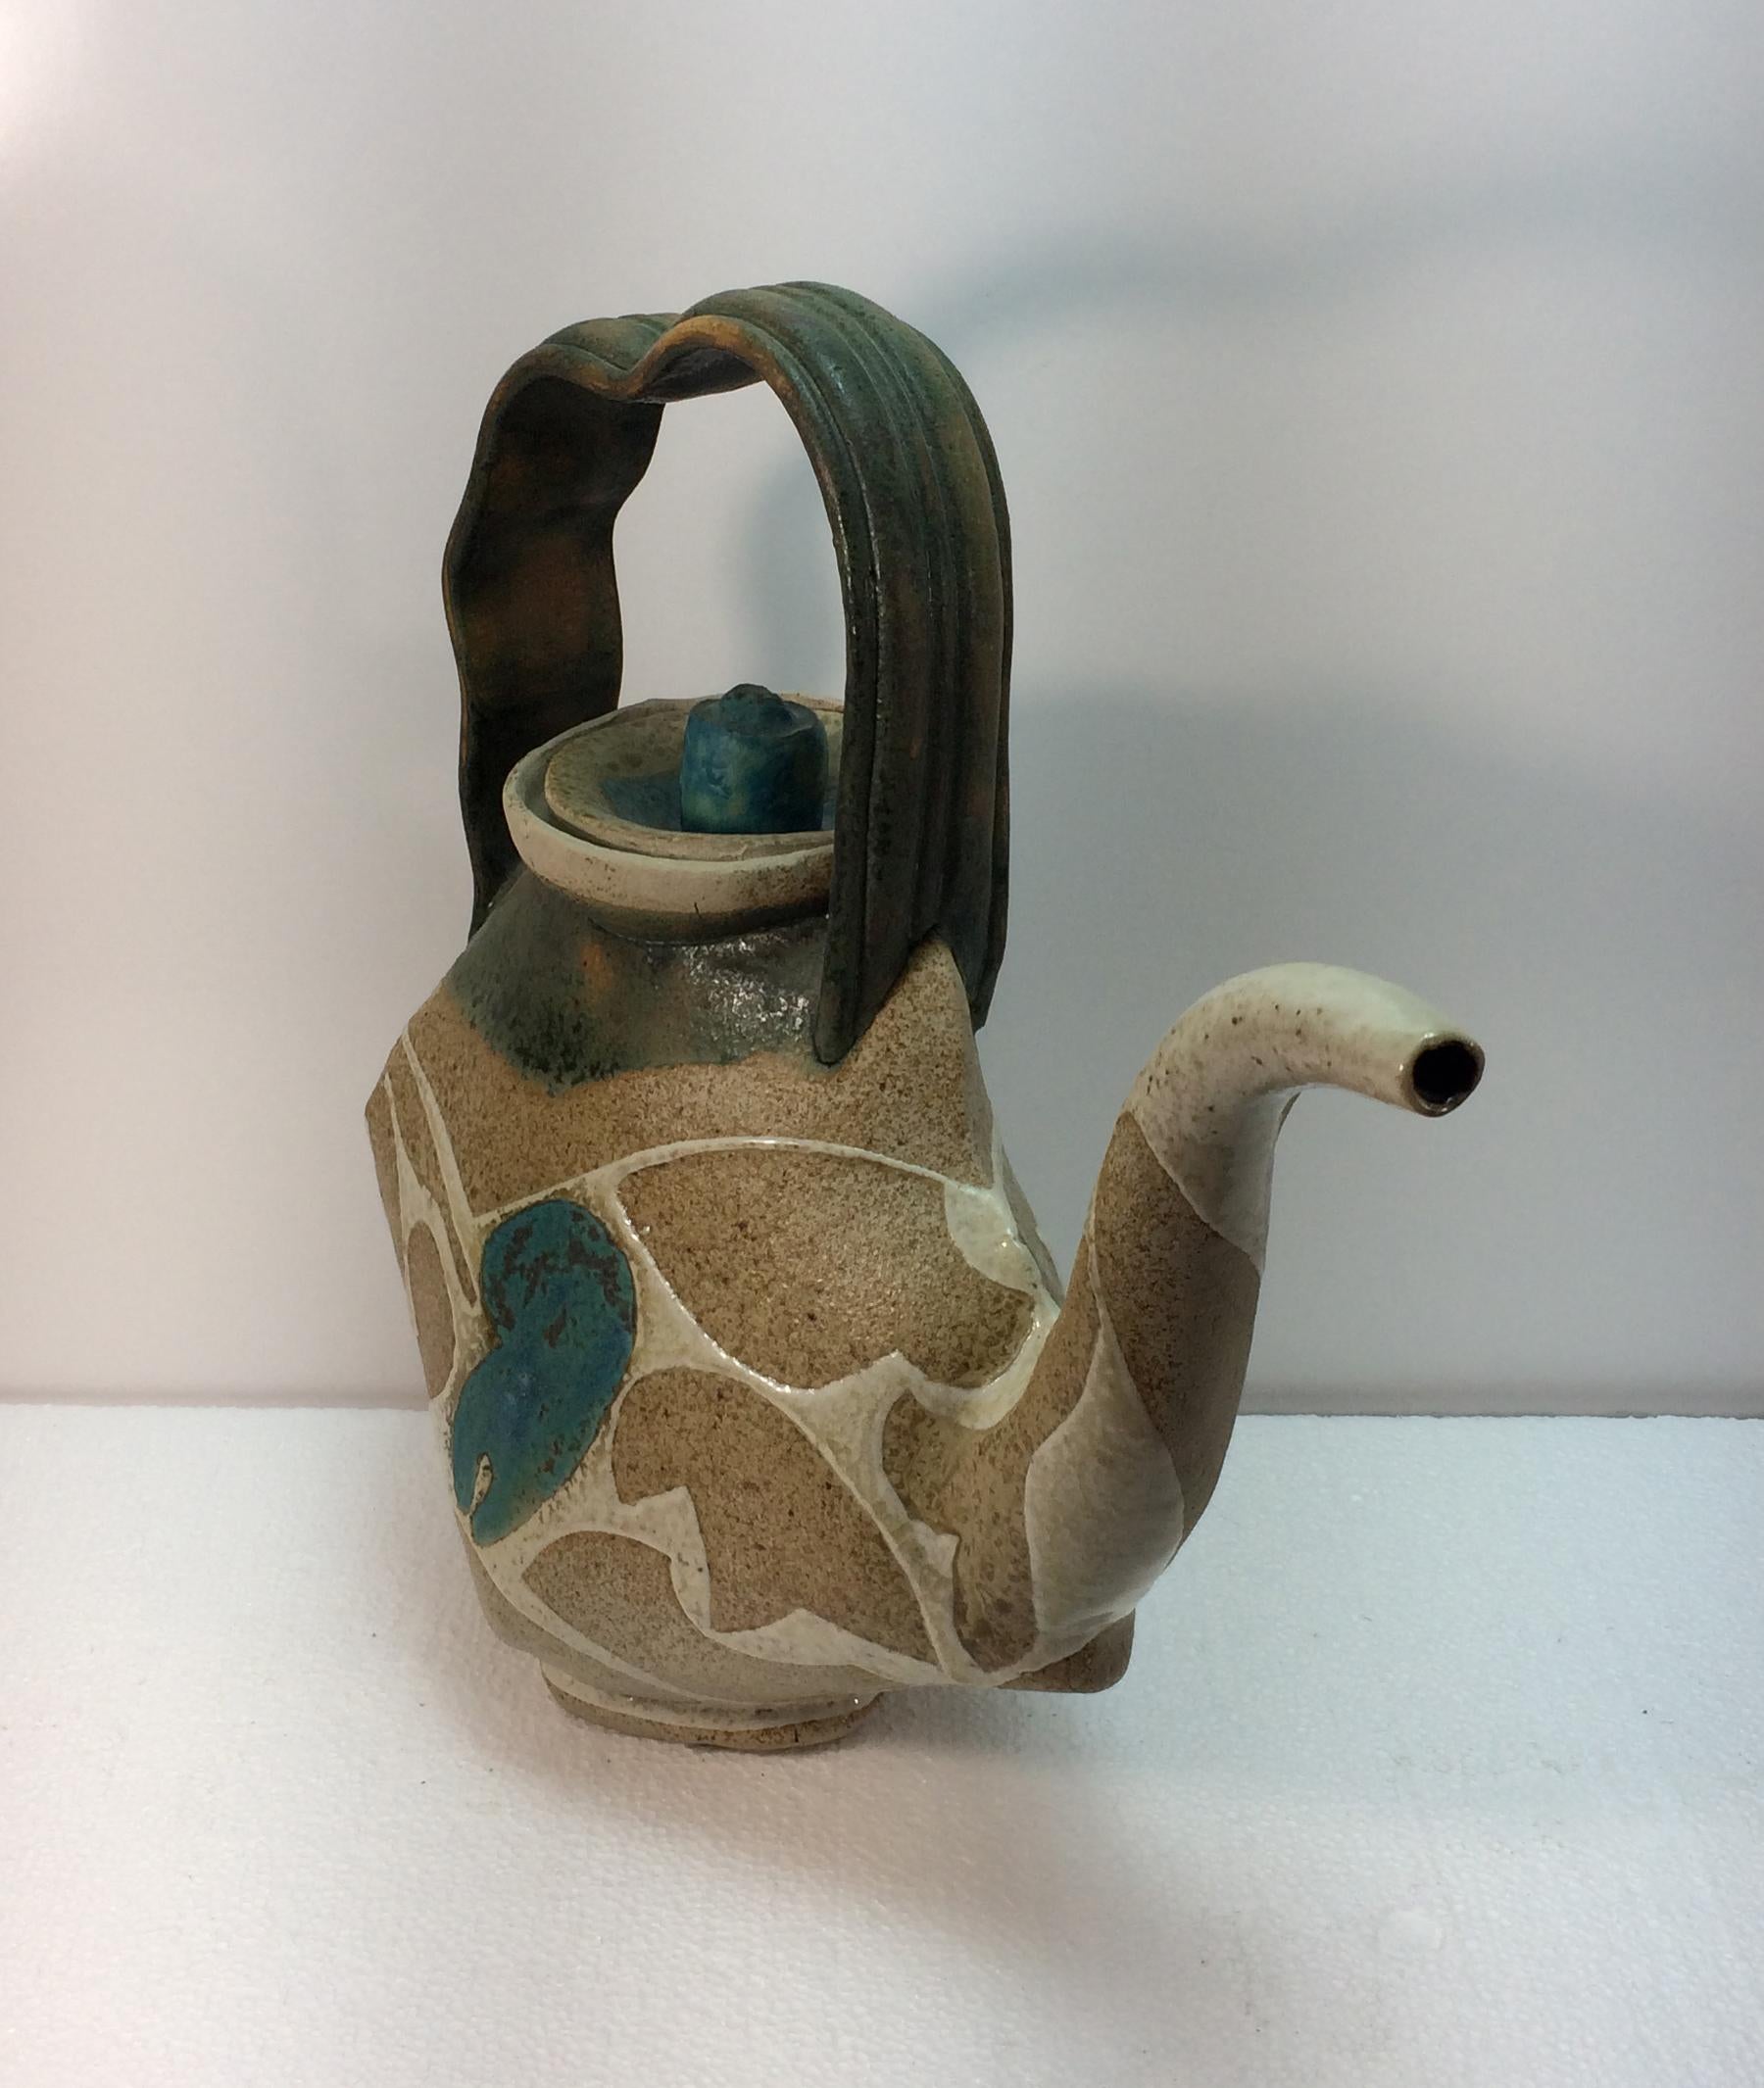 Organic Modern John Gill Vintage Studio Art Pottery Teapot Abstract Ceramic Signed Dated 84 For Sale